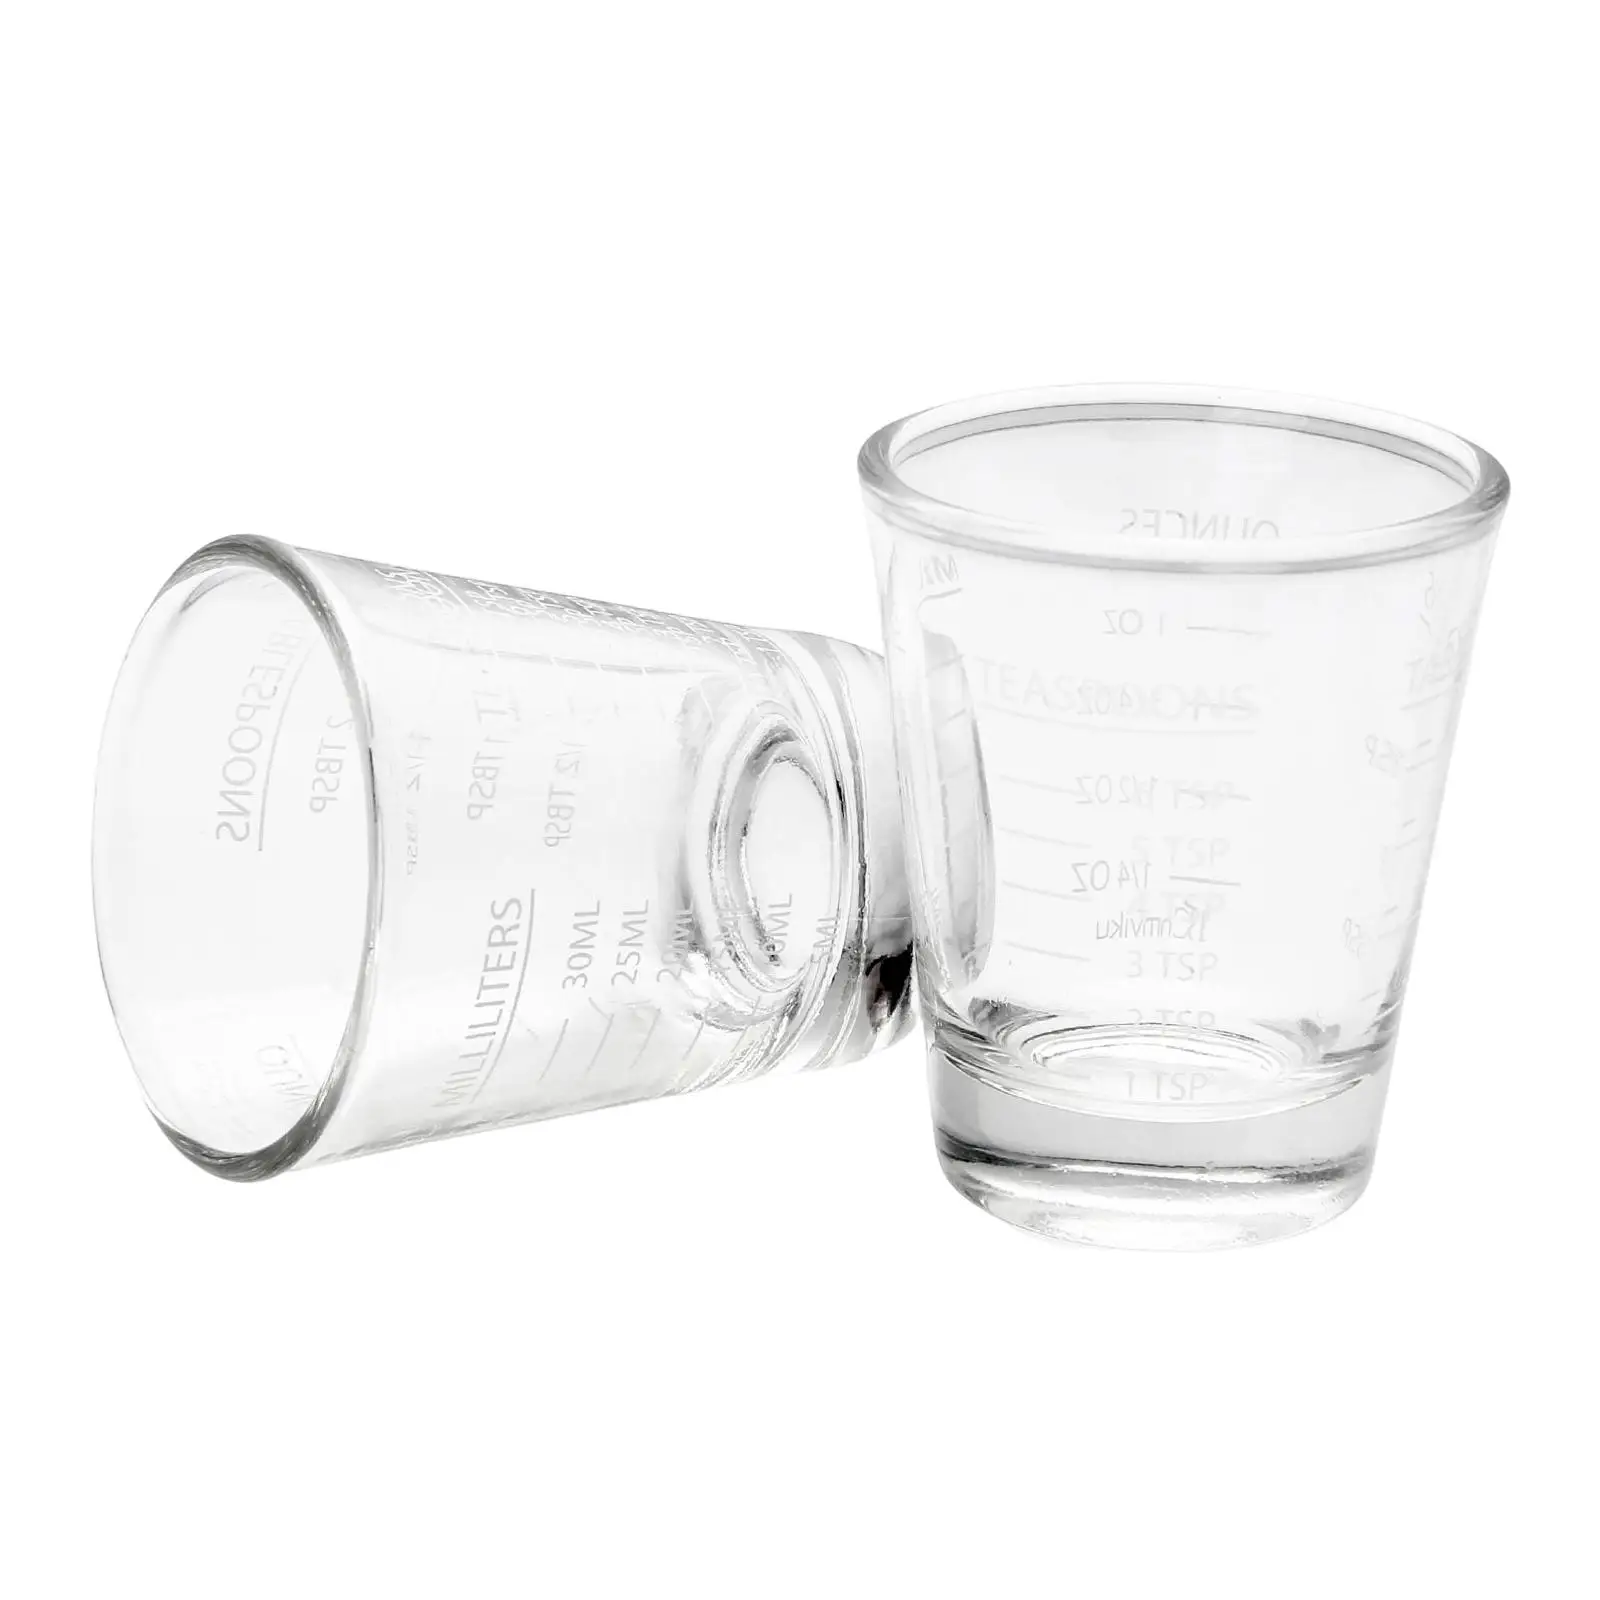 2x 30ml Wine Glasses Baking Measuring Cup Small Milk Cup for Restaurants Bar